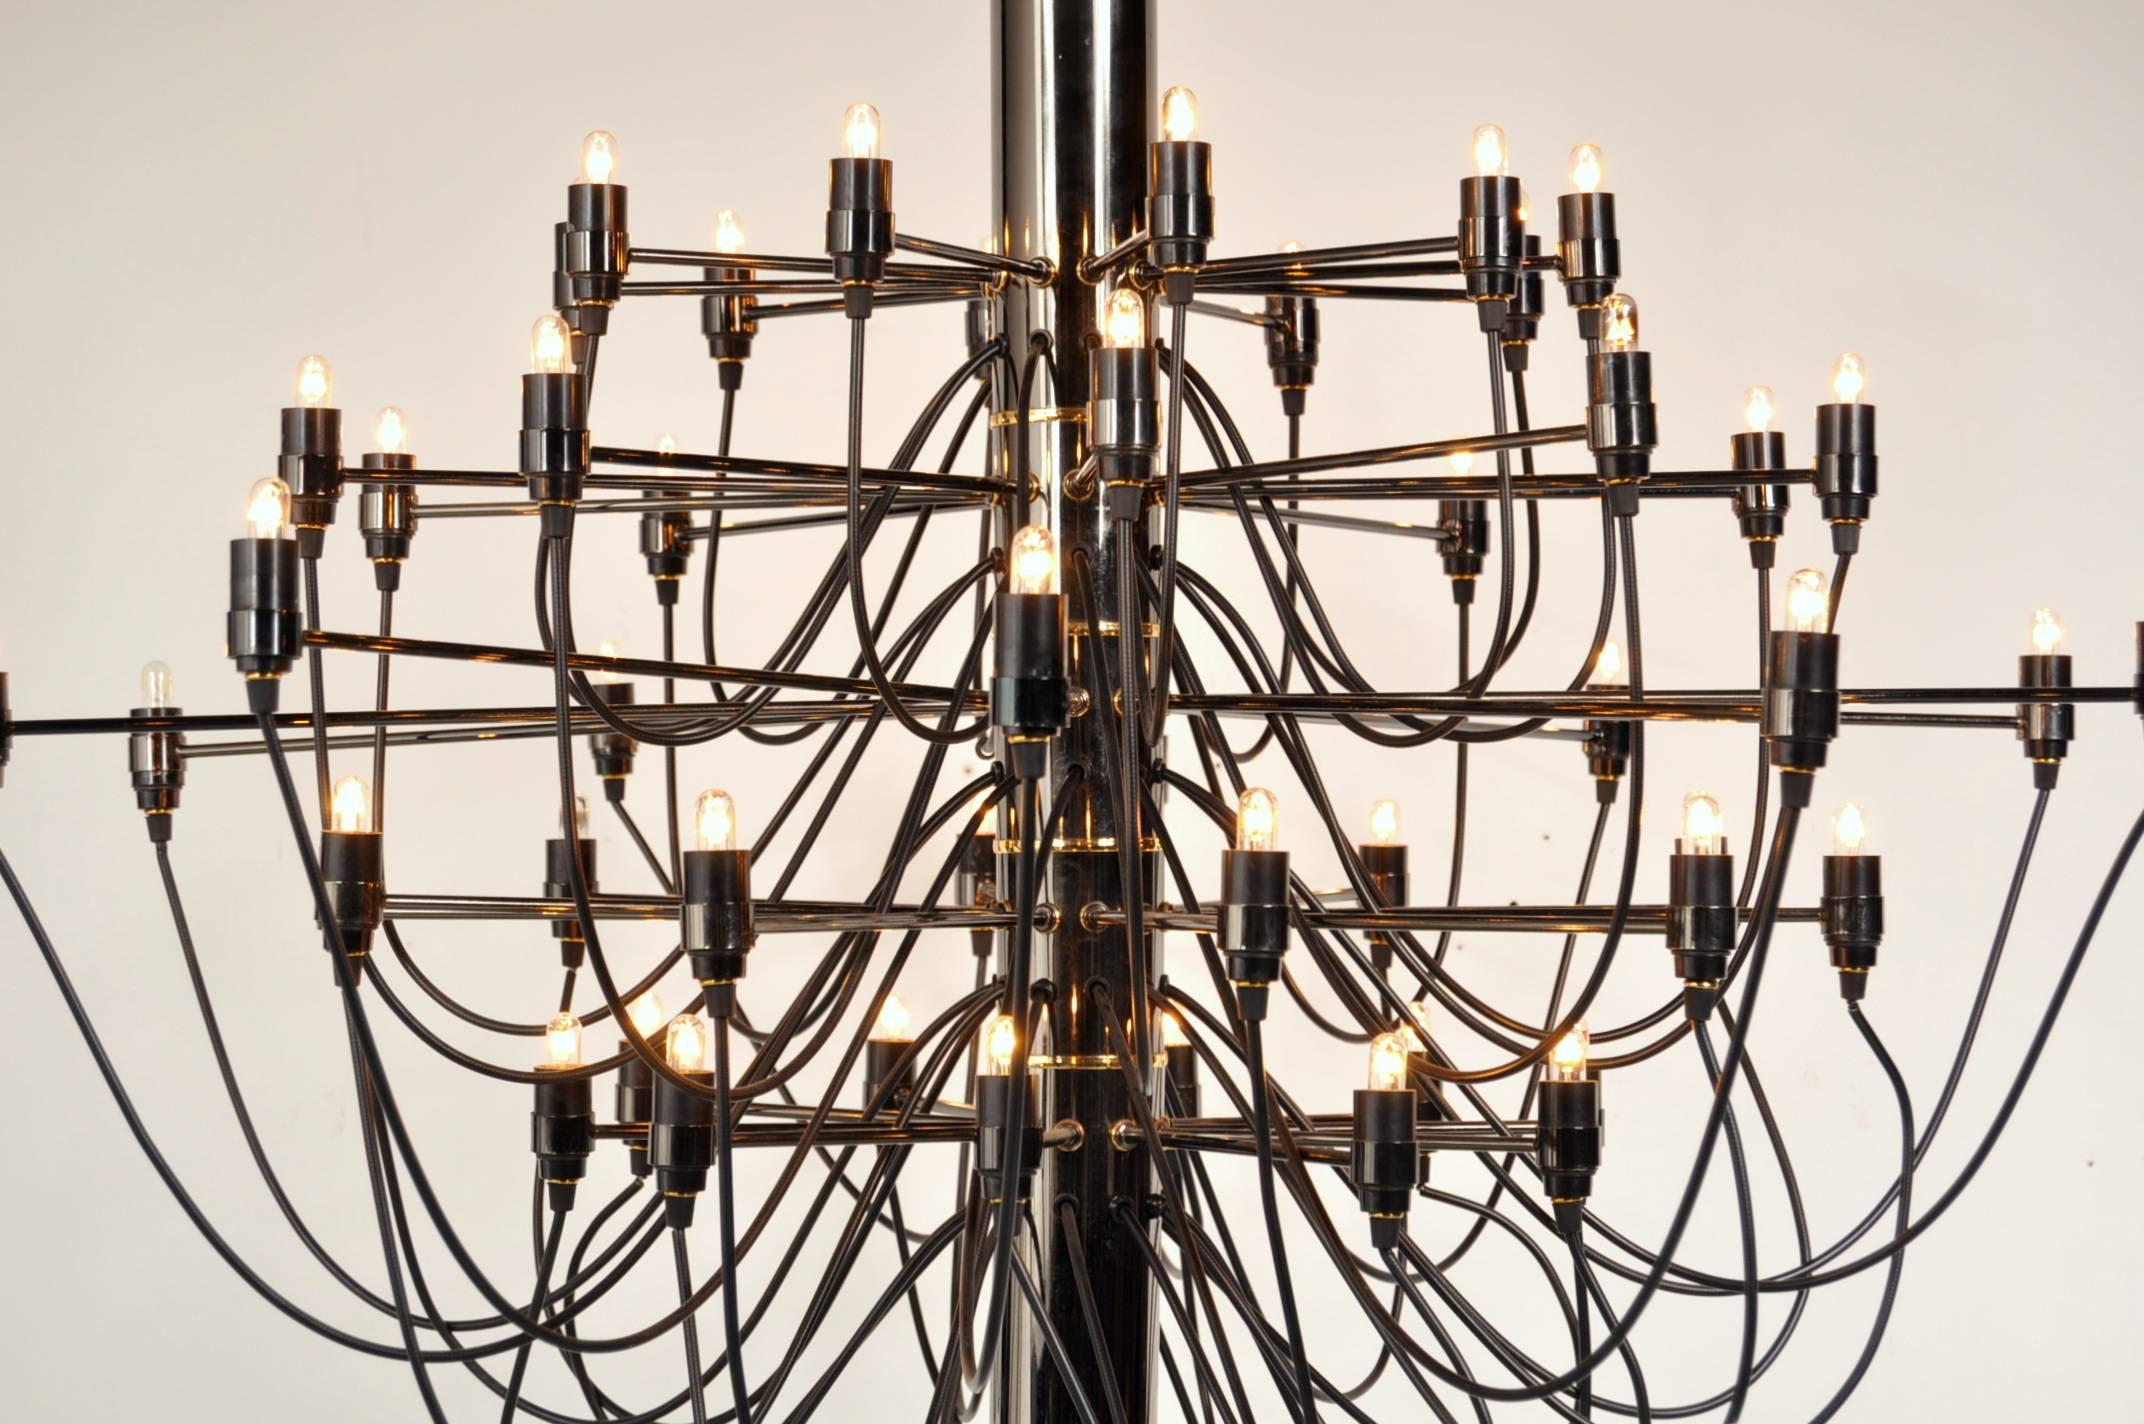 Stunning large chandelier designed by Gino Sarfatti, manufactured by Flos in Italy, circa 1970.

These beautiful piece contains 50 light bulbs, making it an absolute eyecatcher in any room. It is made of high quality black chrome plated metal with